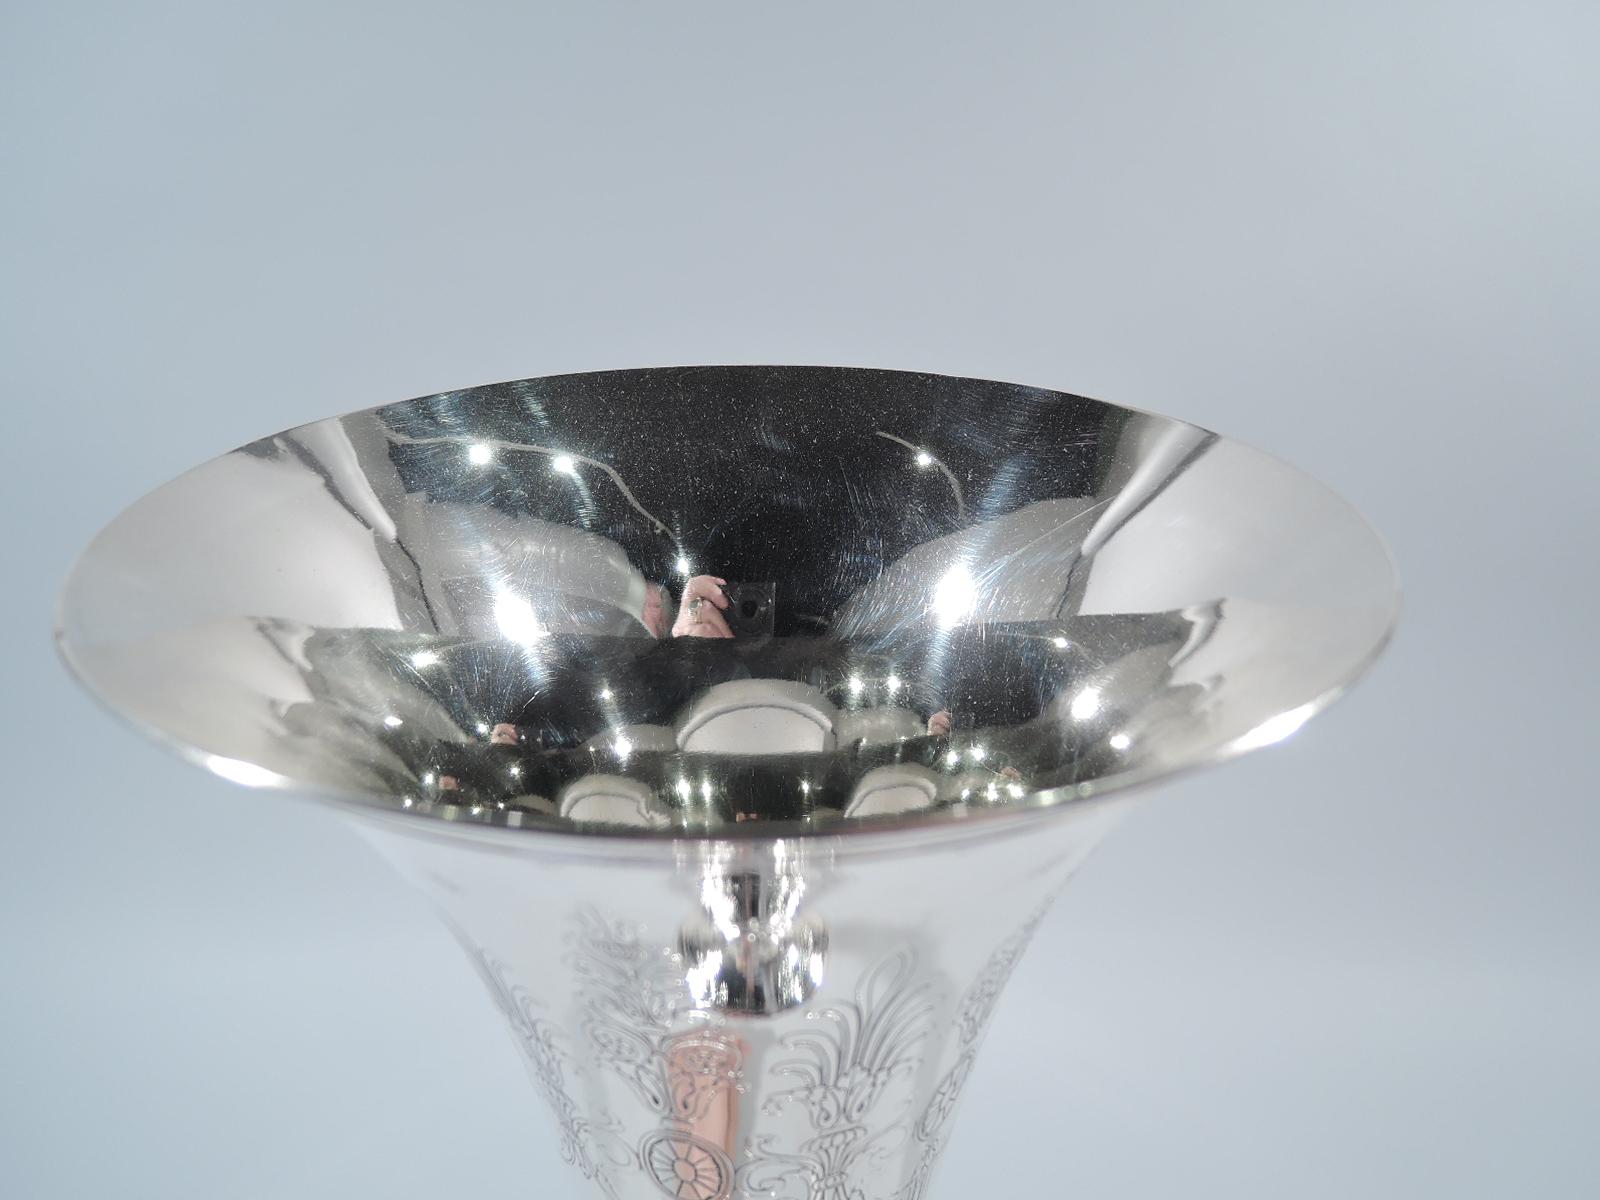 Neoclassical sterling silver trumpet vase. Made by Tiffany & Co. in New York, circa 1913. Tapering sides and stepped raised foot. Acid-etched repeating pattern with swags and paterae and armorial shield frames (all vacant). Stylized leaves at base.